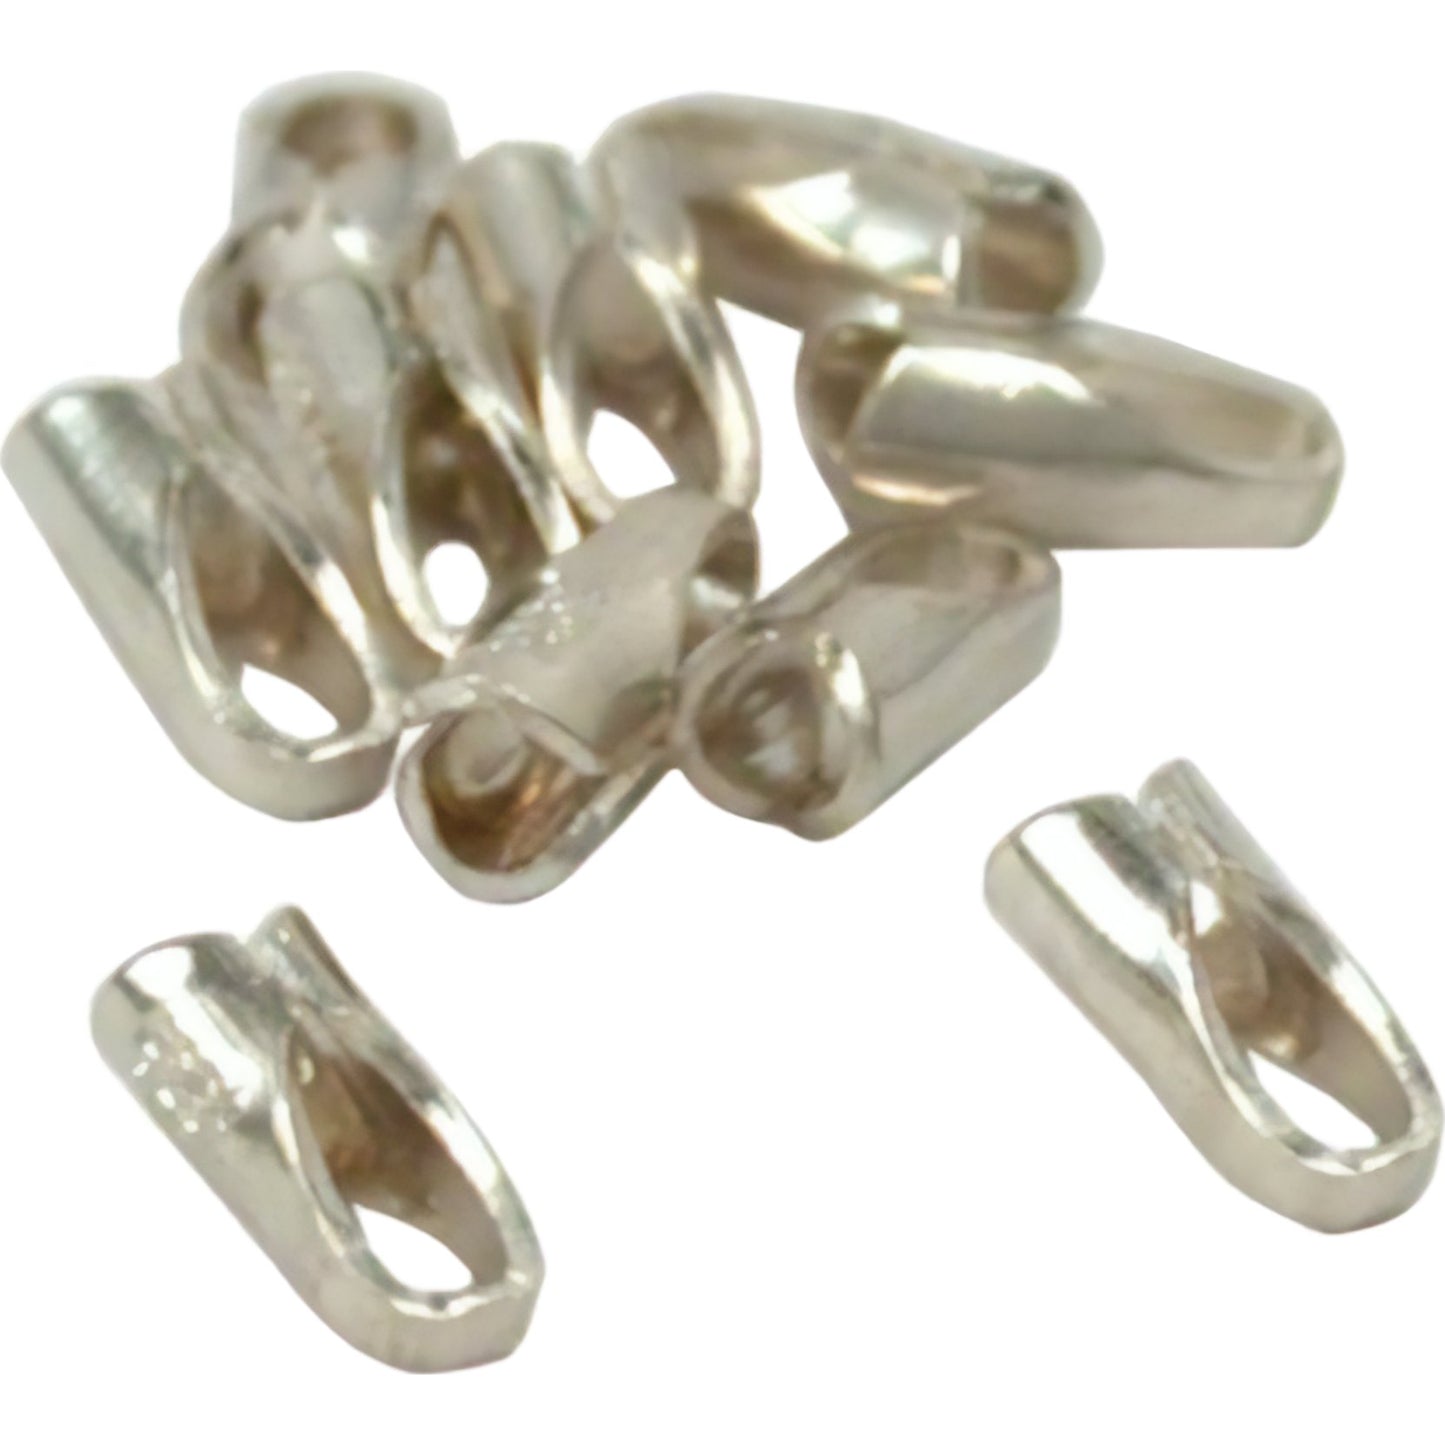 5 Pairs Sterling Silver Crimp End Caps 5mm